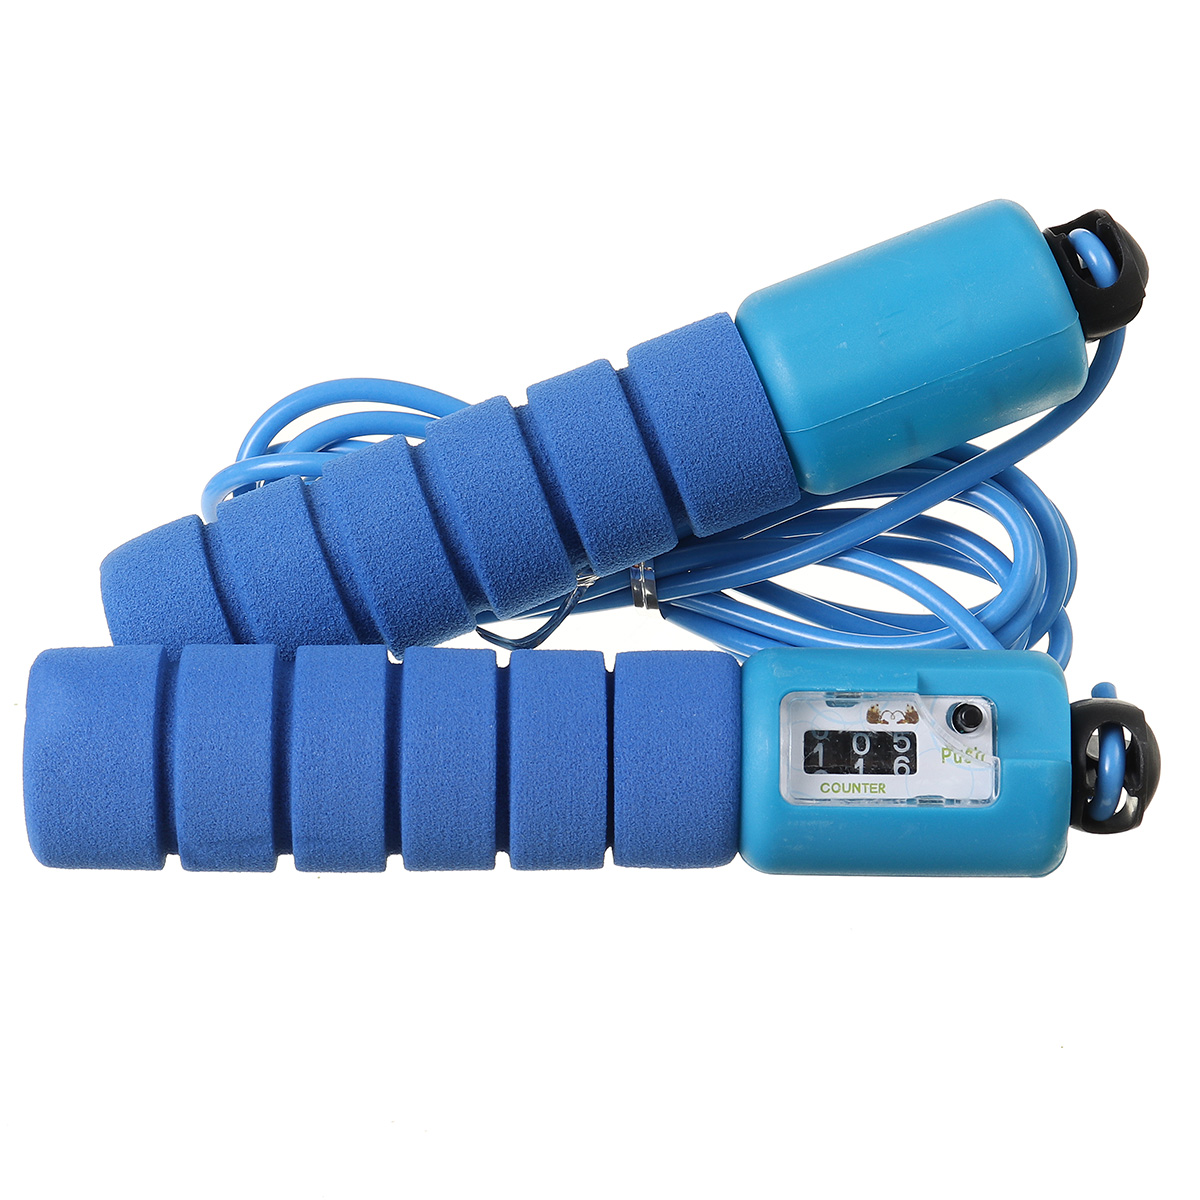 287cm-Rope-Jumping-Home-Adjustable-Speed-Training-Sport-Fitness-Skipping-Rope-1678695-5